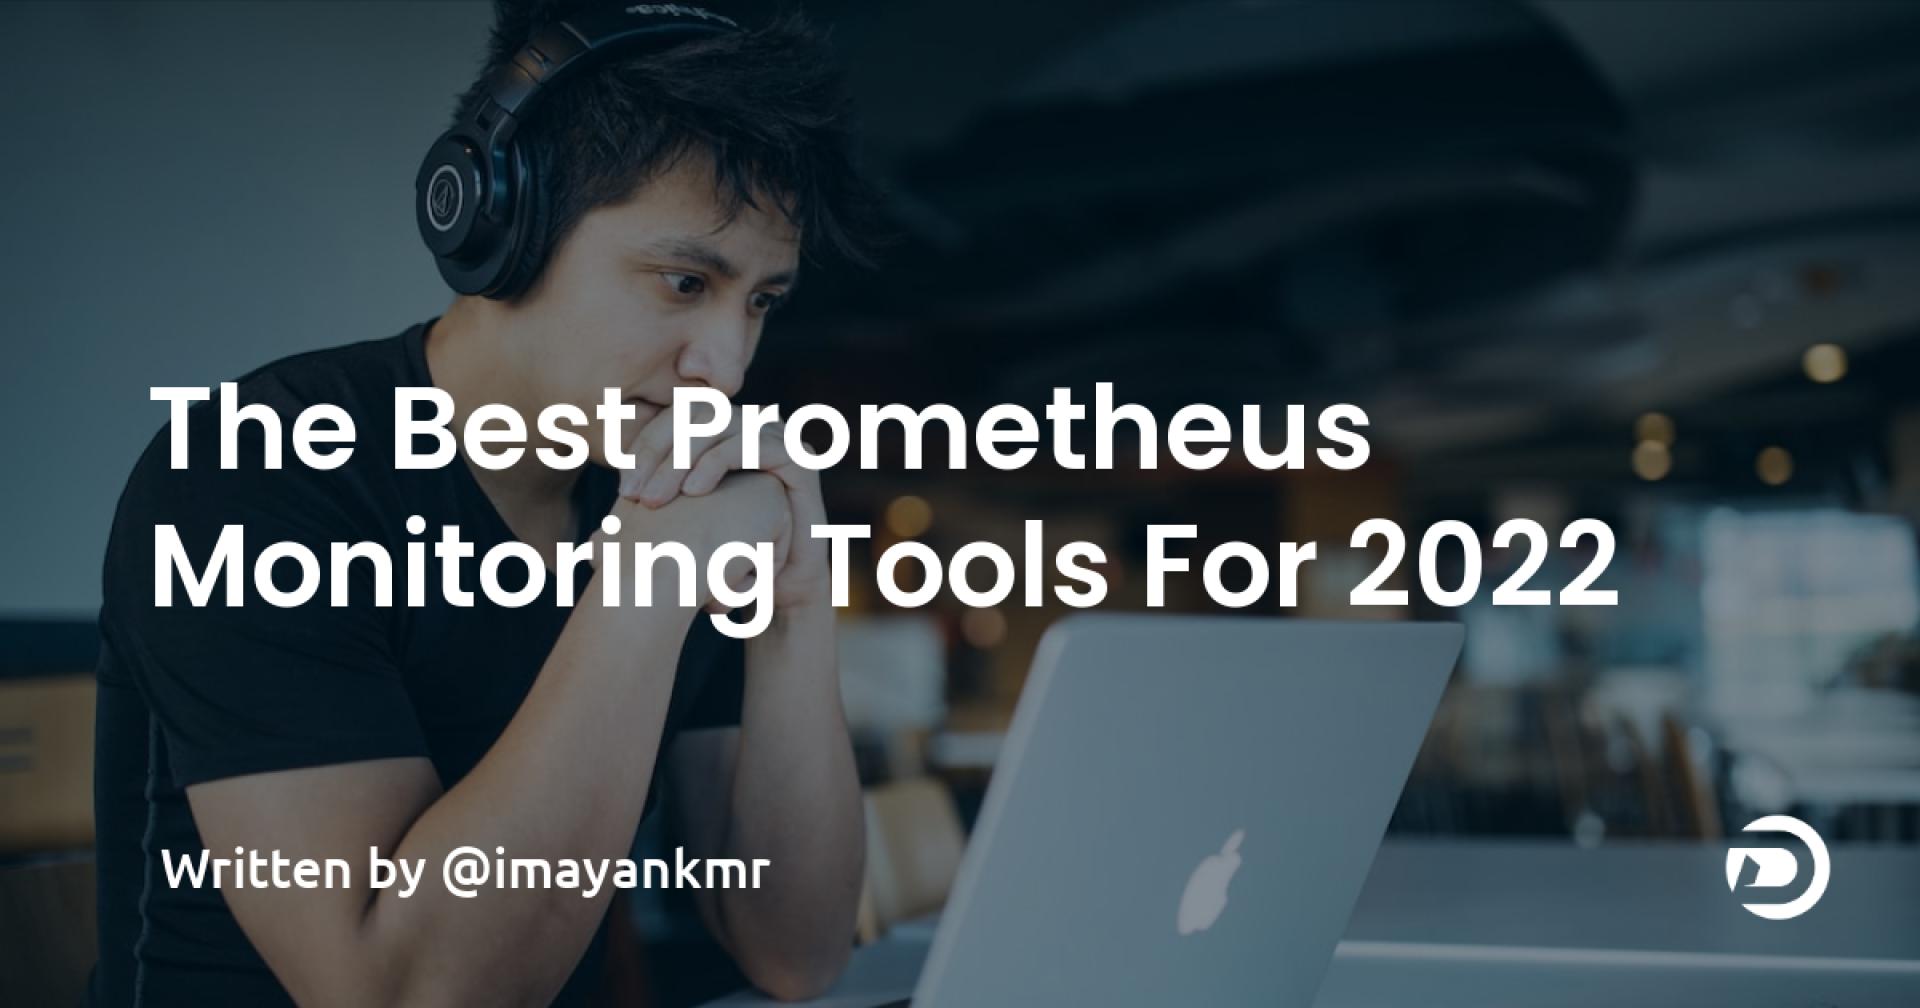 The Best Prometheus Monitoring Tools For 2022 